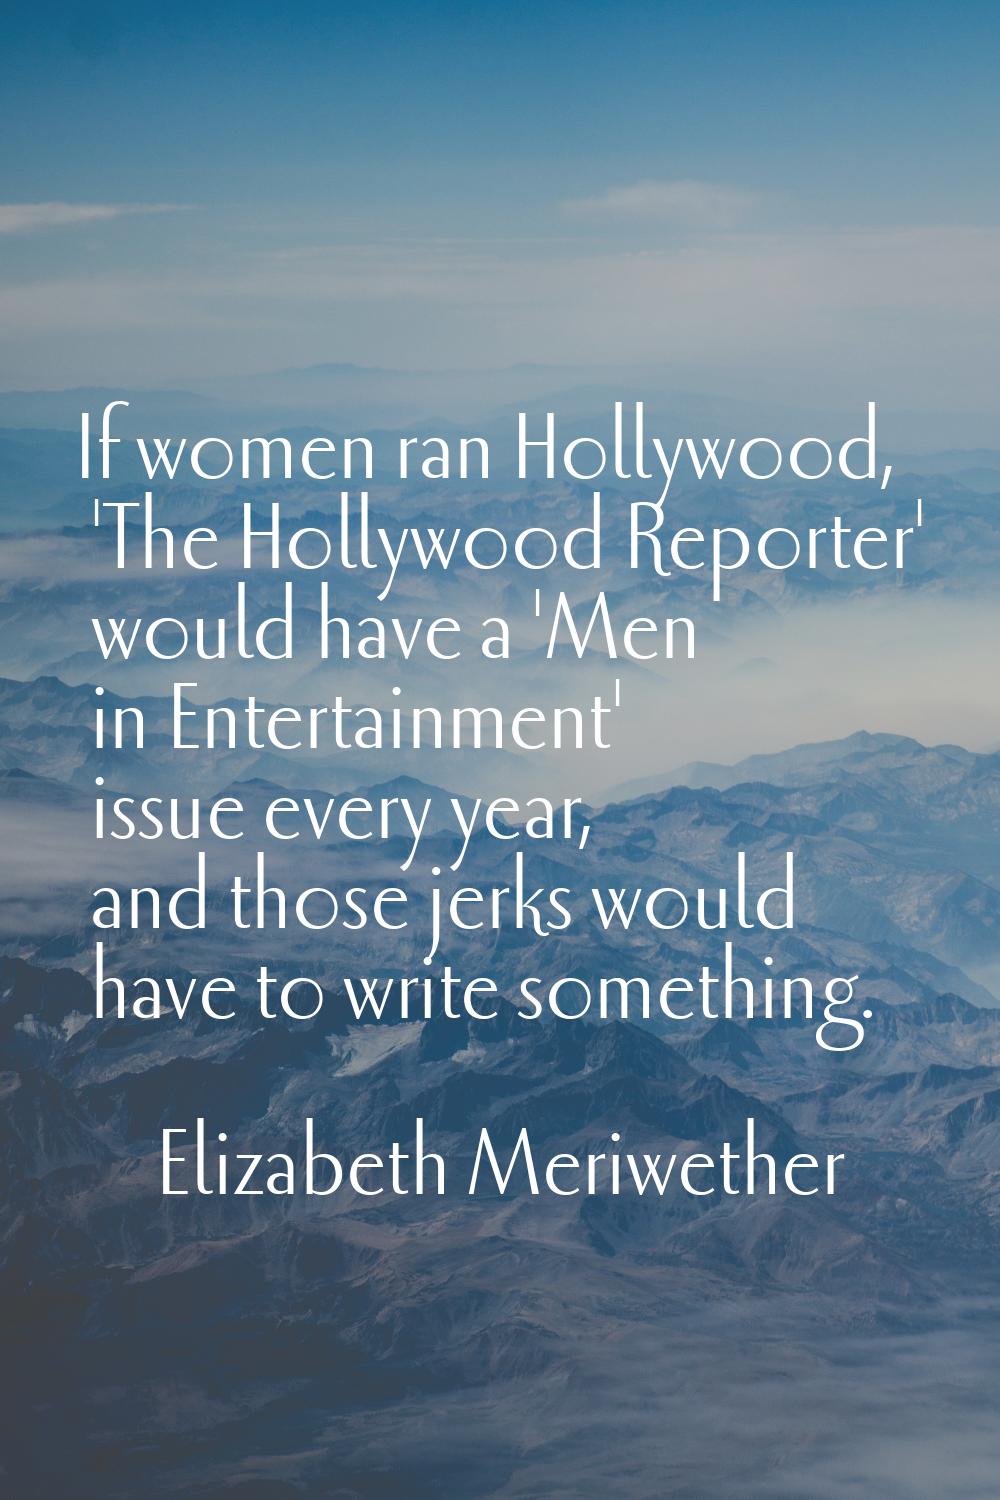 If women ran Hollywood, 'The Hollywood Reporter' would have a 'Men in Entertainment' issue every ye